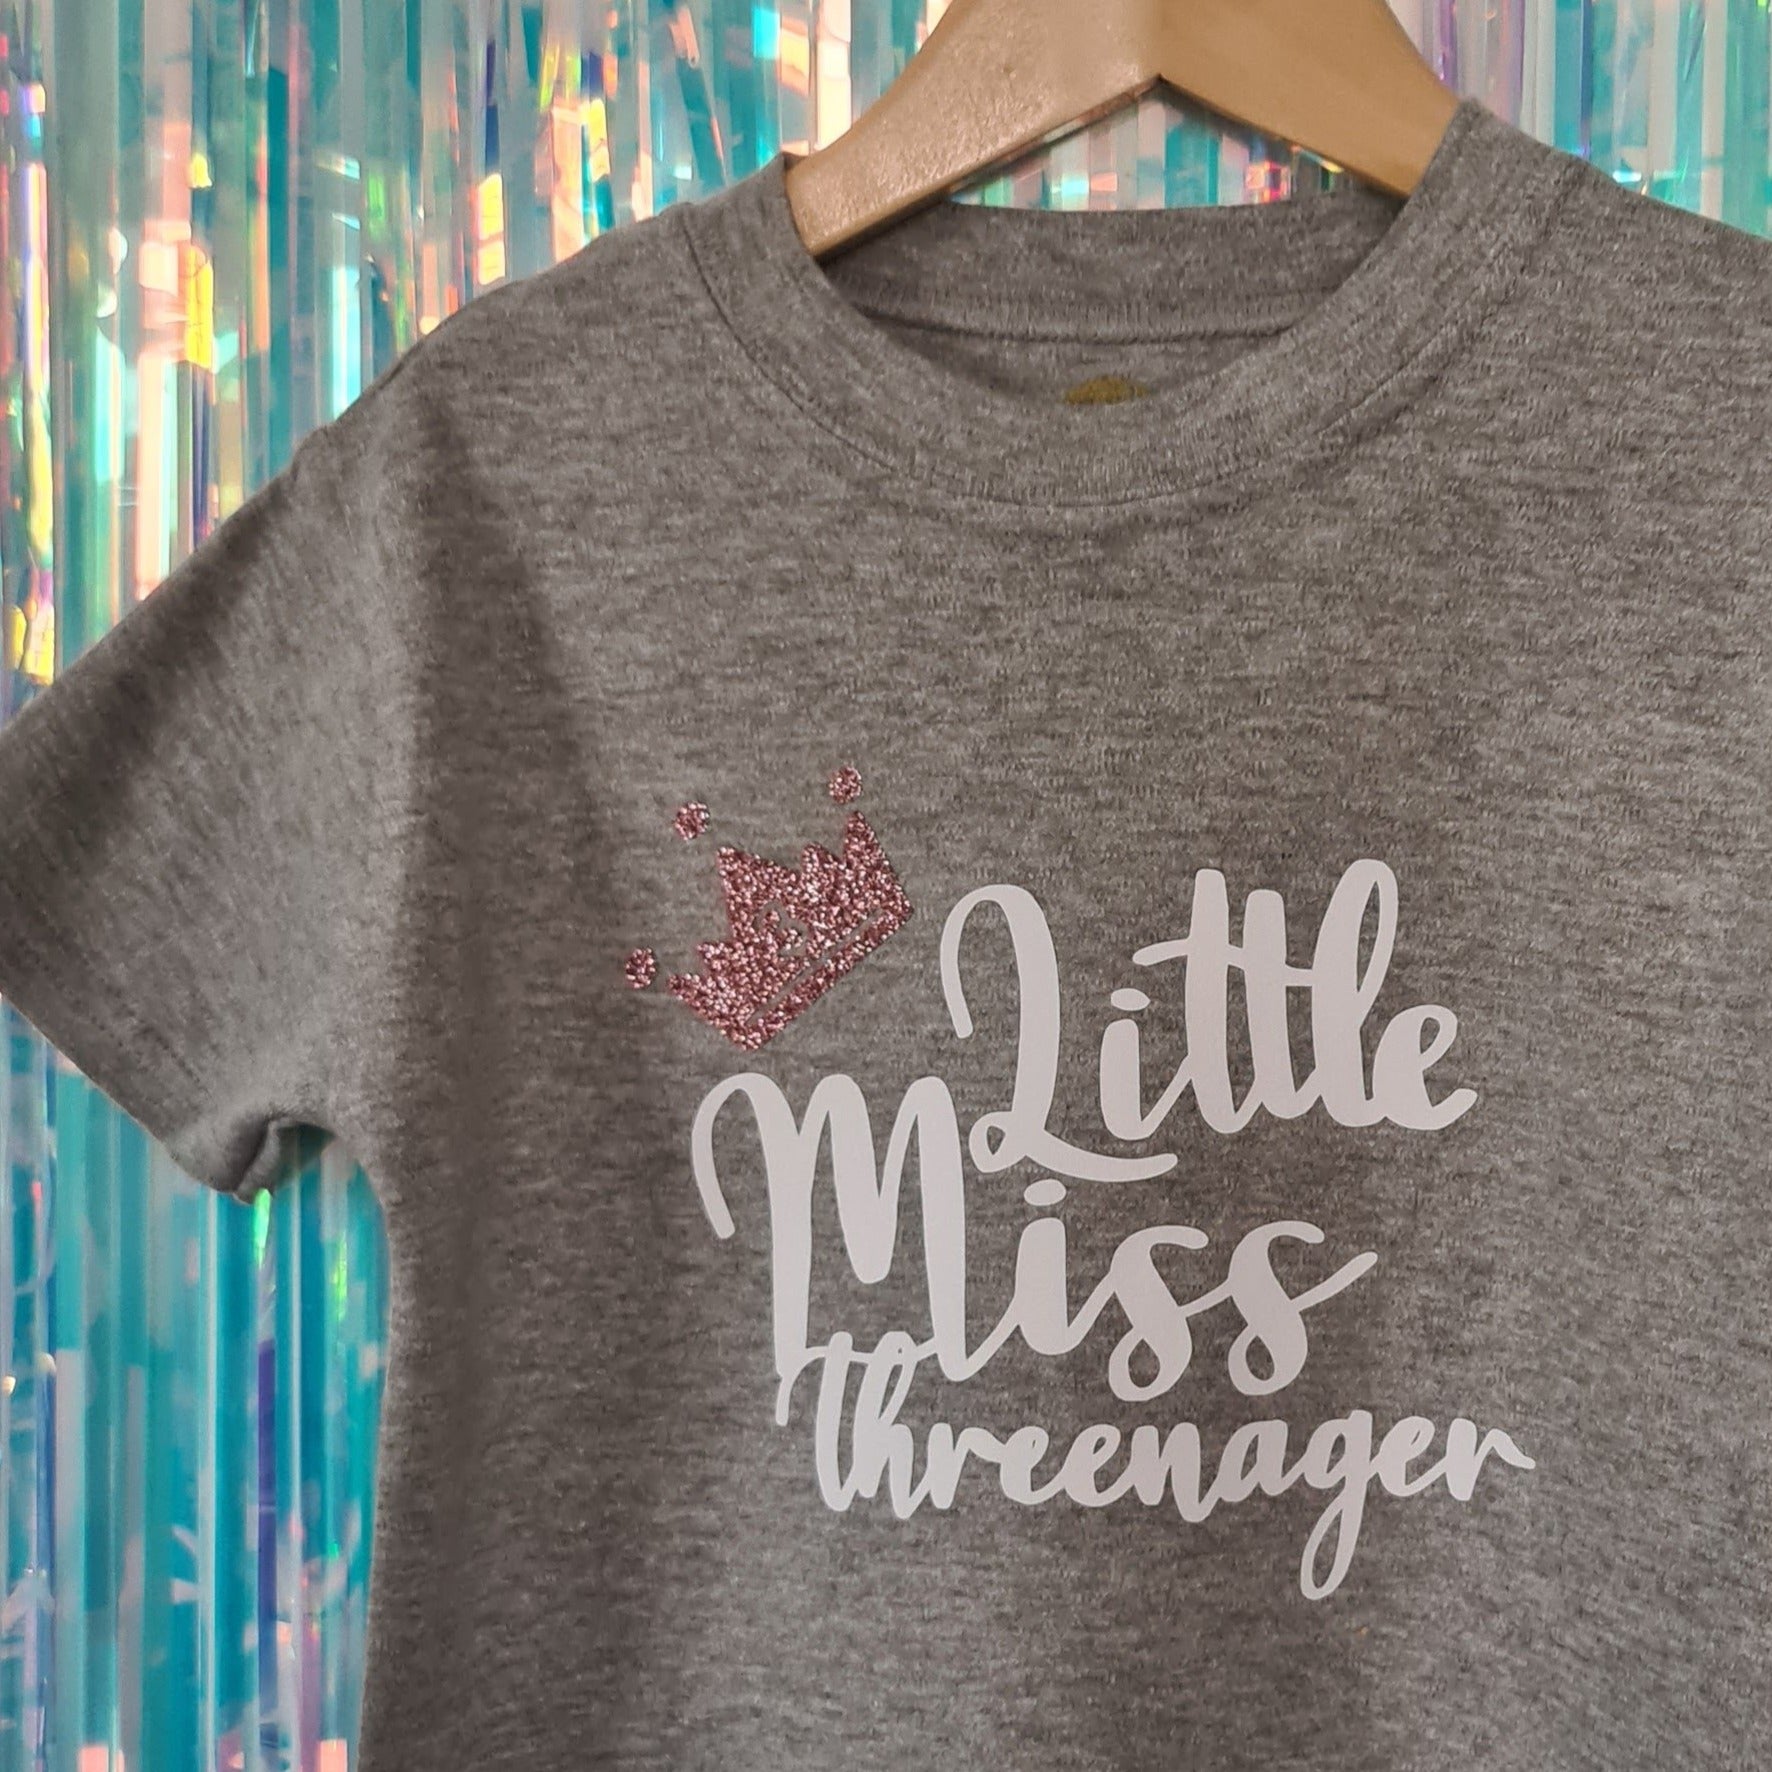 Little Miss Threenager - Grey tshirt with white text and pink glitter crown